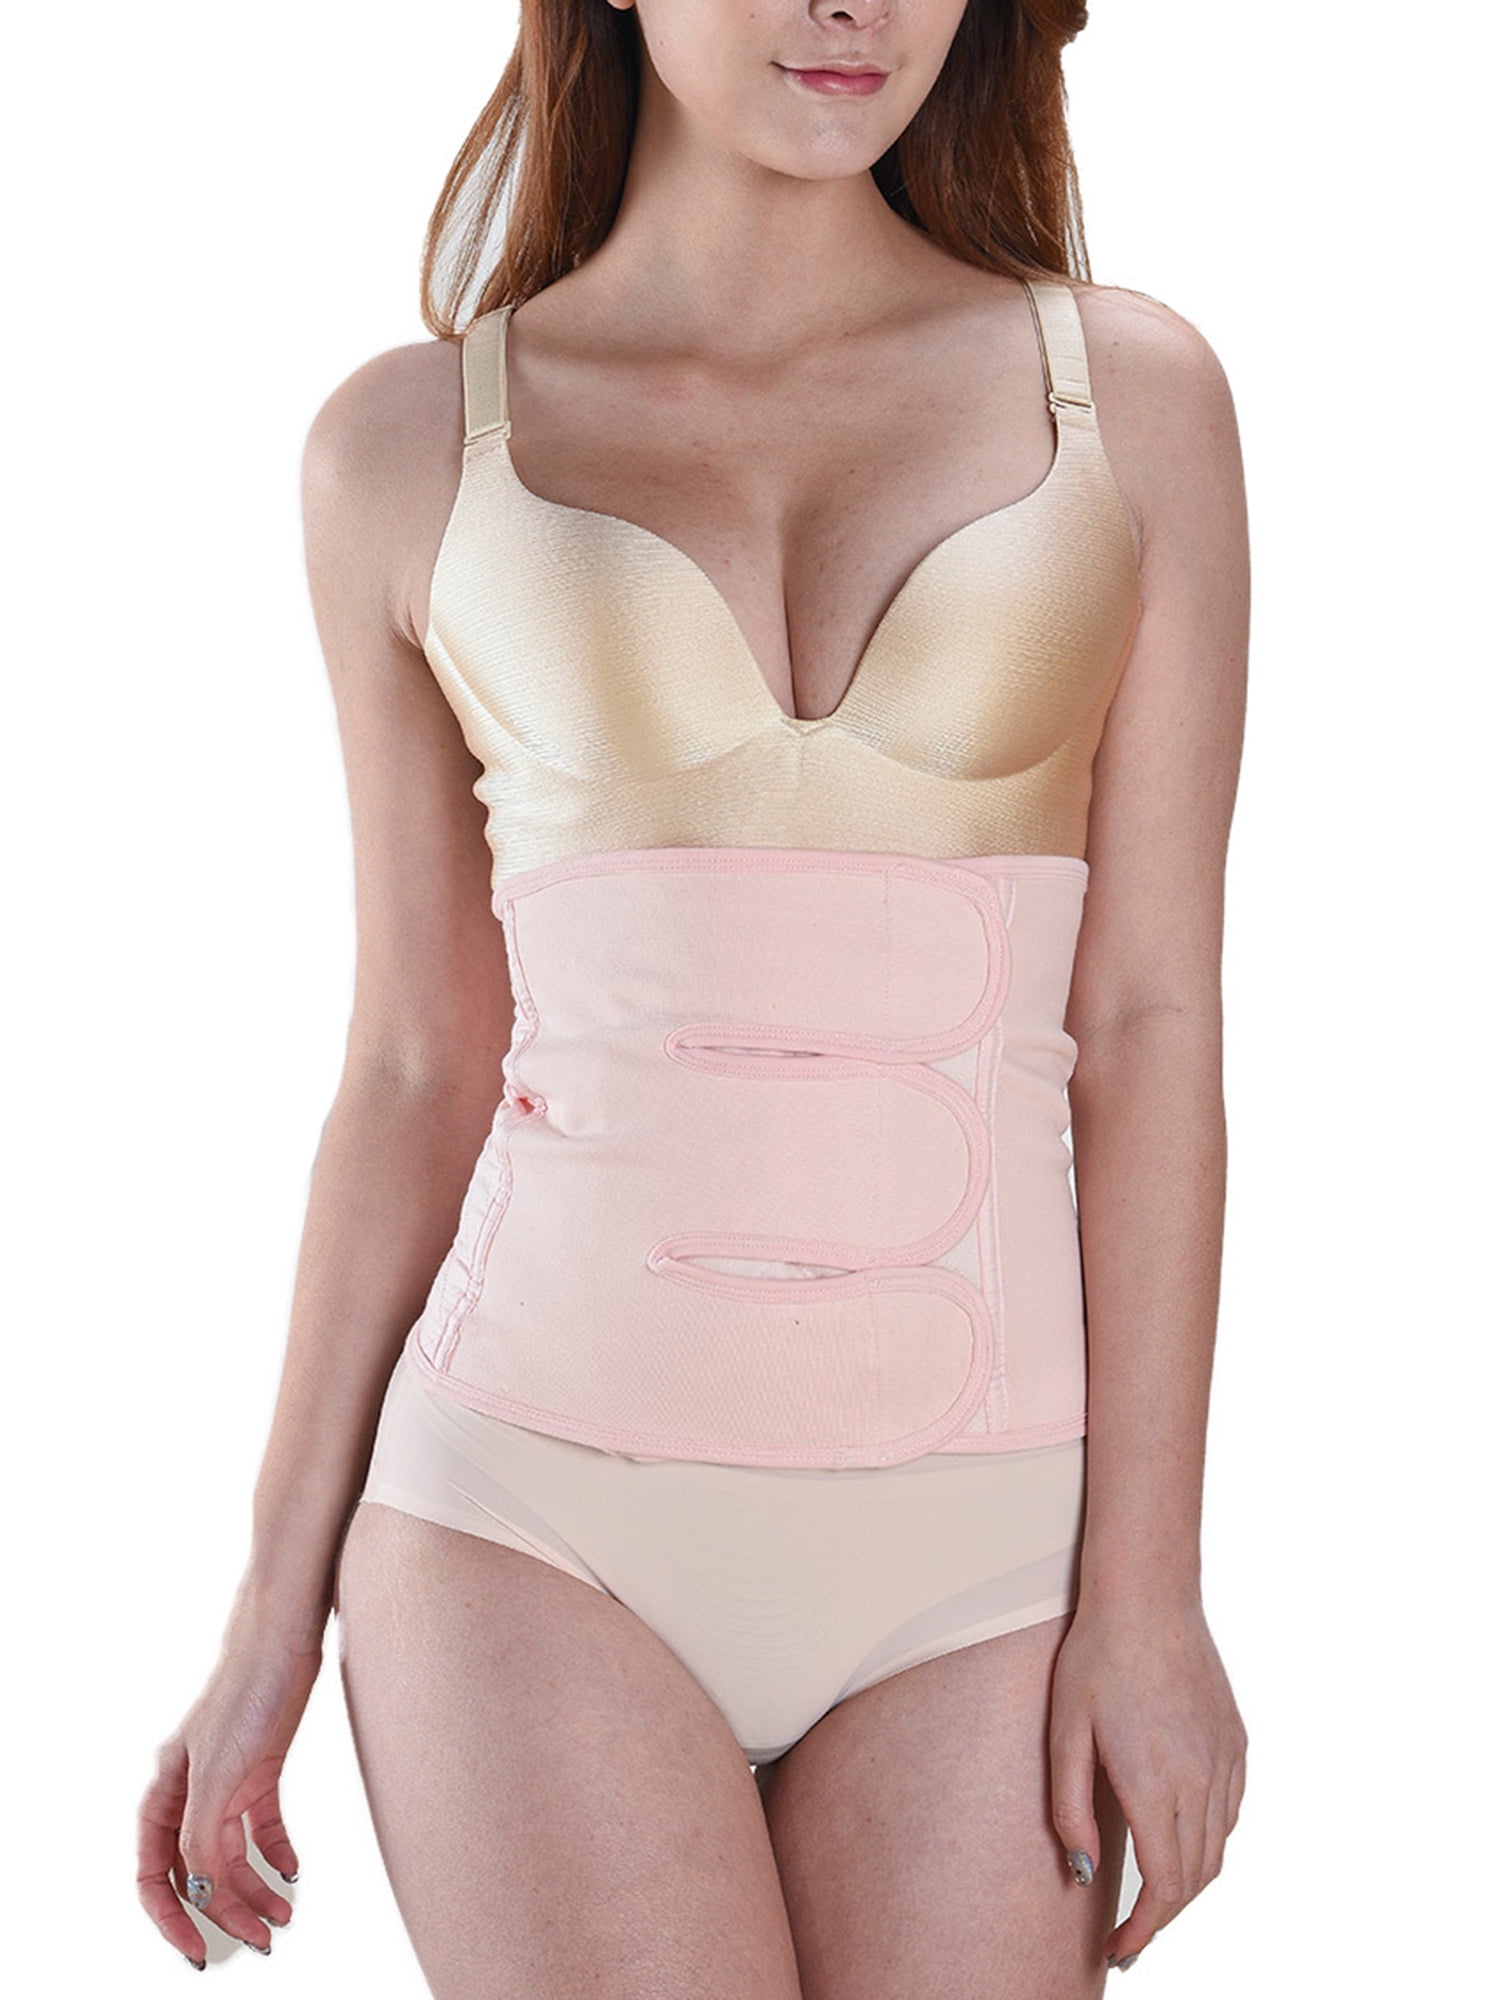 Breathable Thin Women Waist Belly Band Postpartum Recovery Body Shaper Belt 